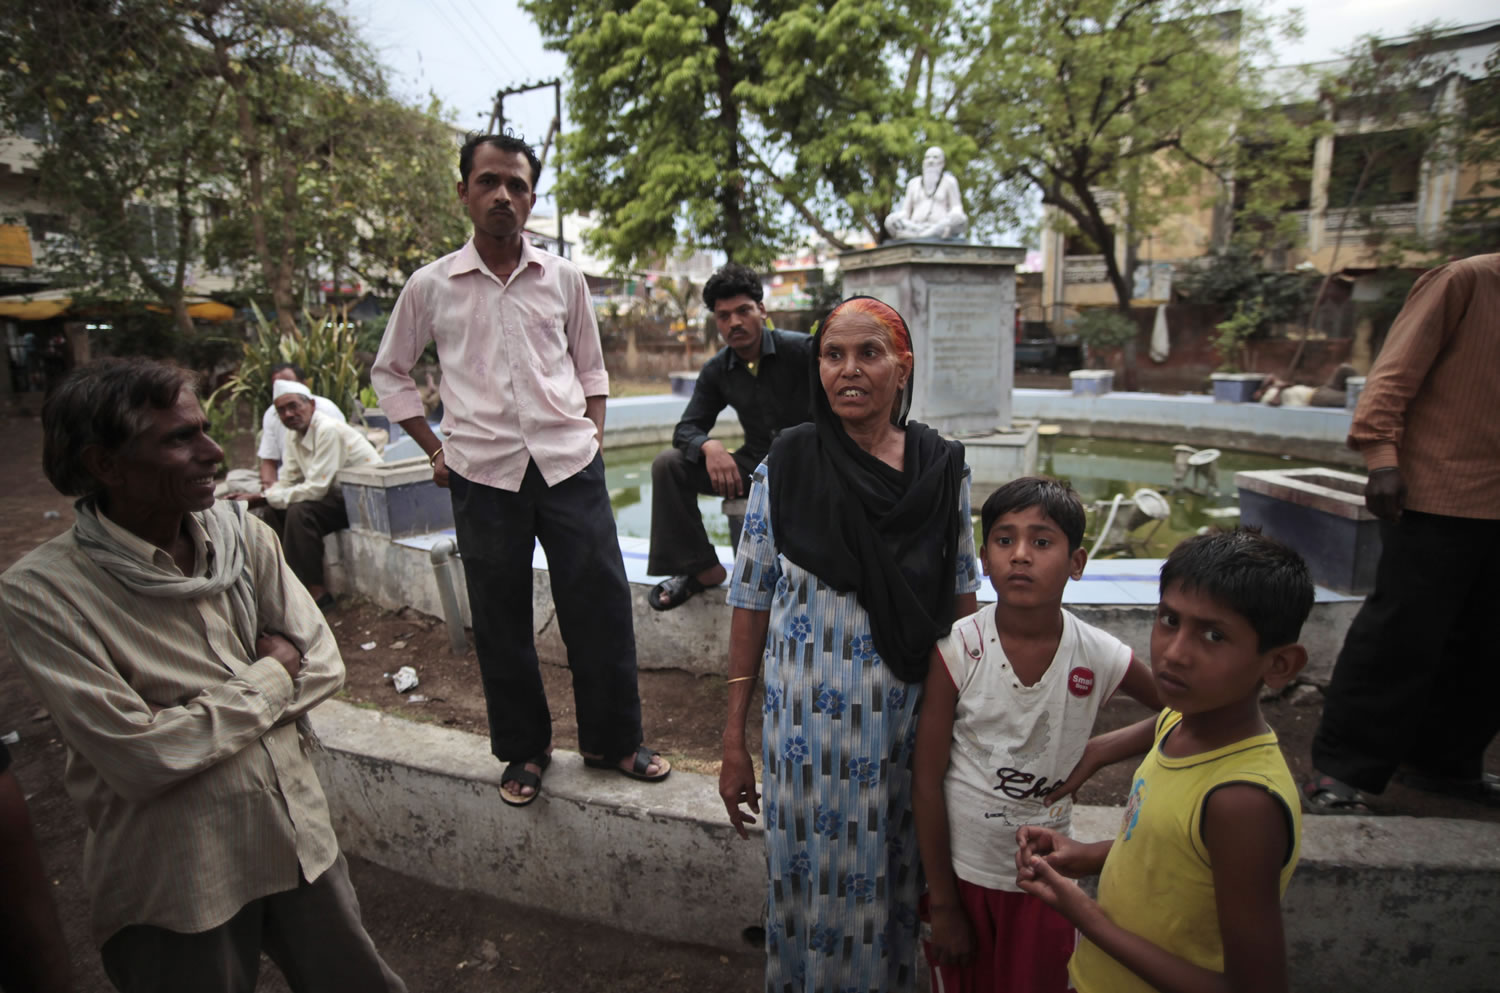 In this May 10, 2012 photo, Fatima Munshi, center, shows the fountain in Khandwa, India where her sons Saroo and Guddu played as she worked as a daily wage laborer about 25 years ago. Living in Australia, Saroo Brierley, 30, reunited with his biological mother, Munshi, in February 2012, 25 years after an ill-fated train ride left him an orphan on the streets of Calcutta.